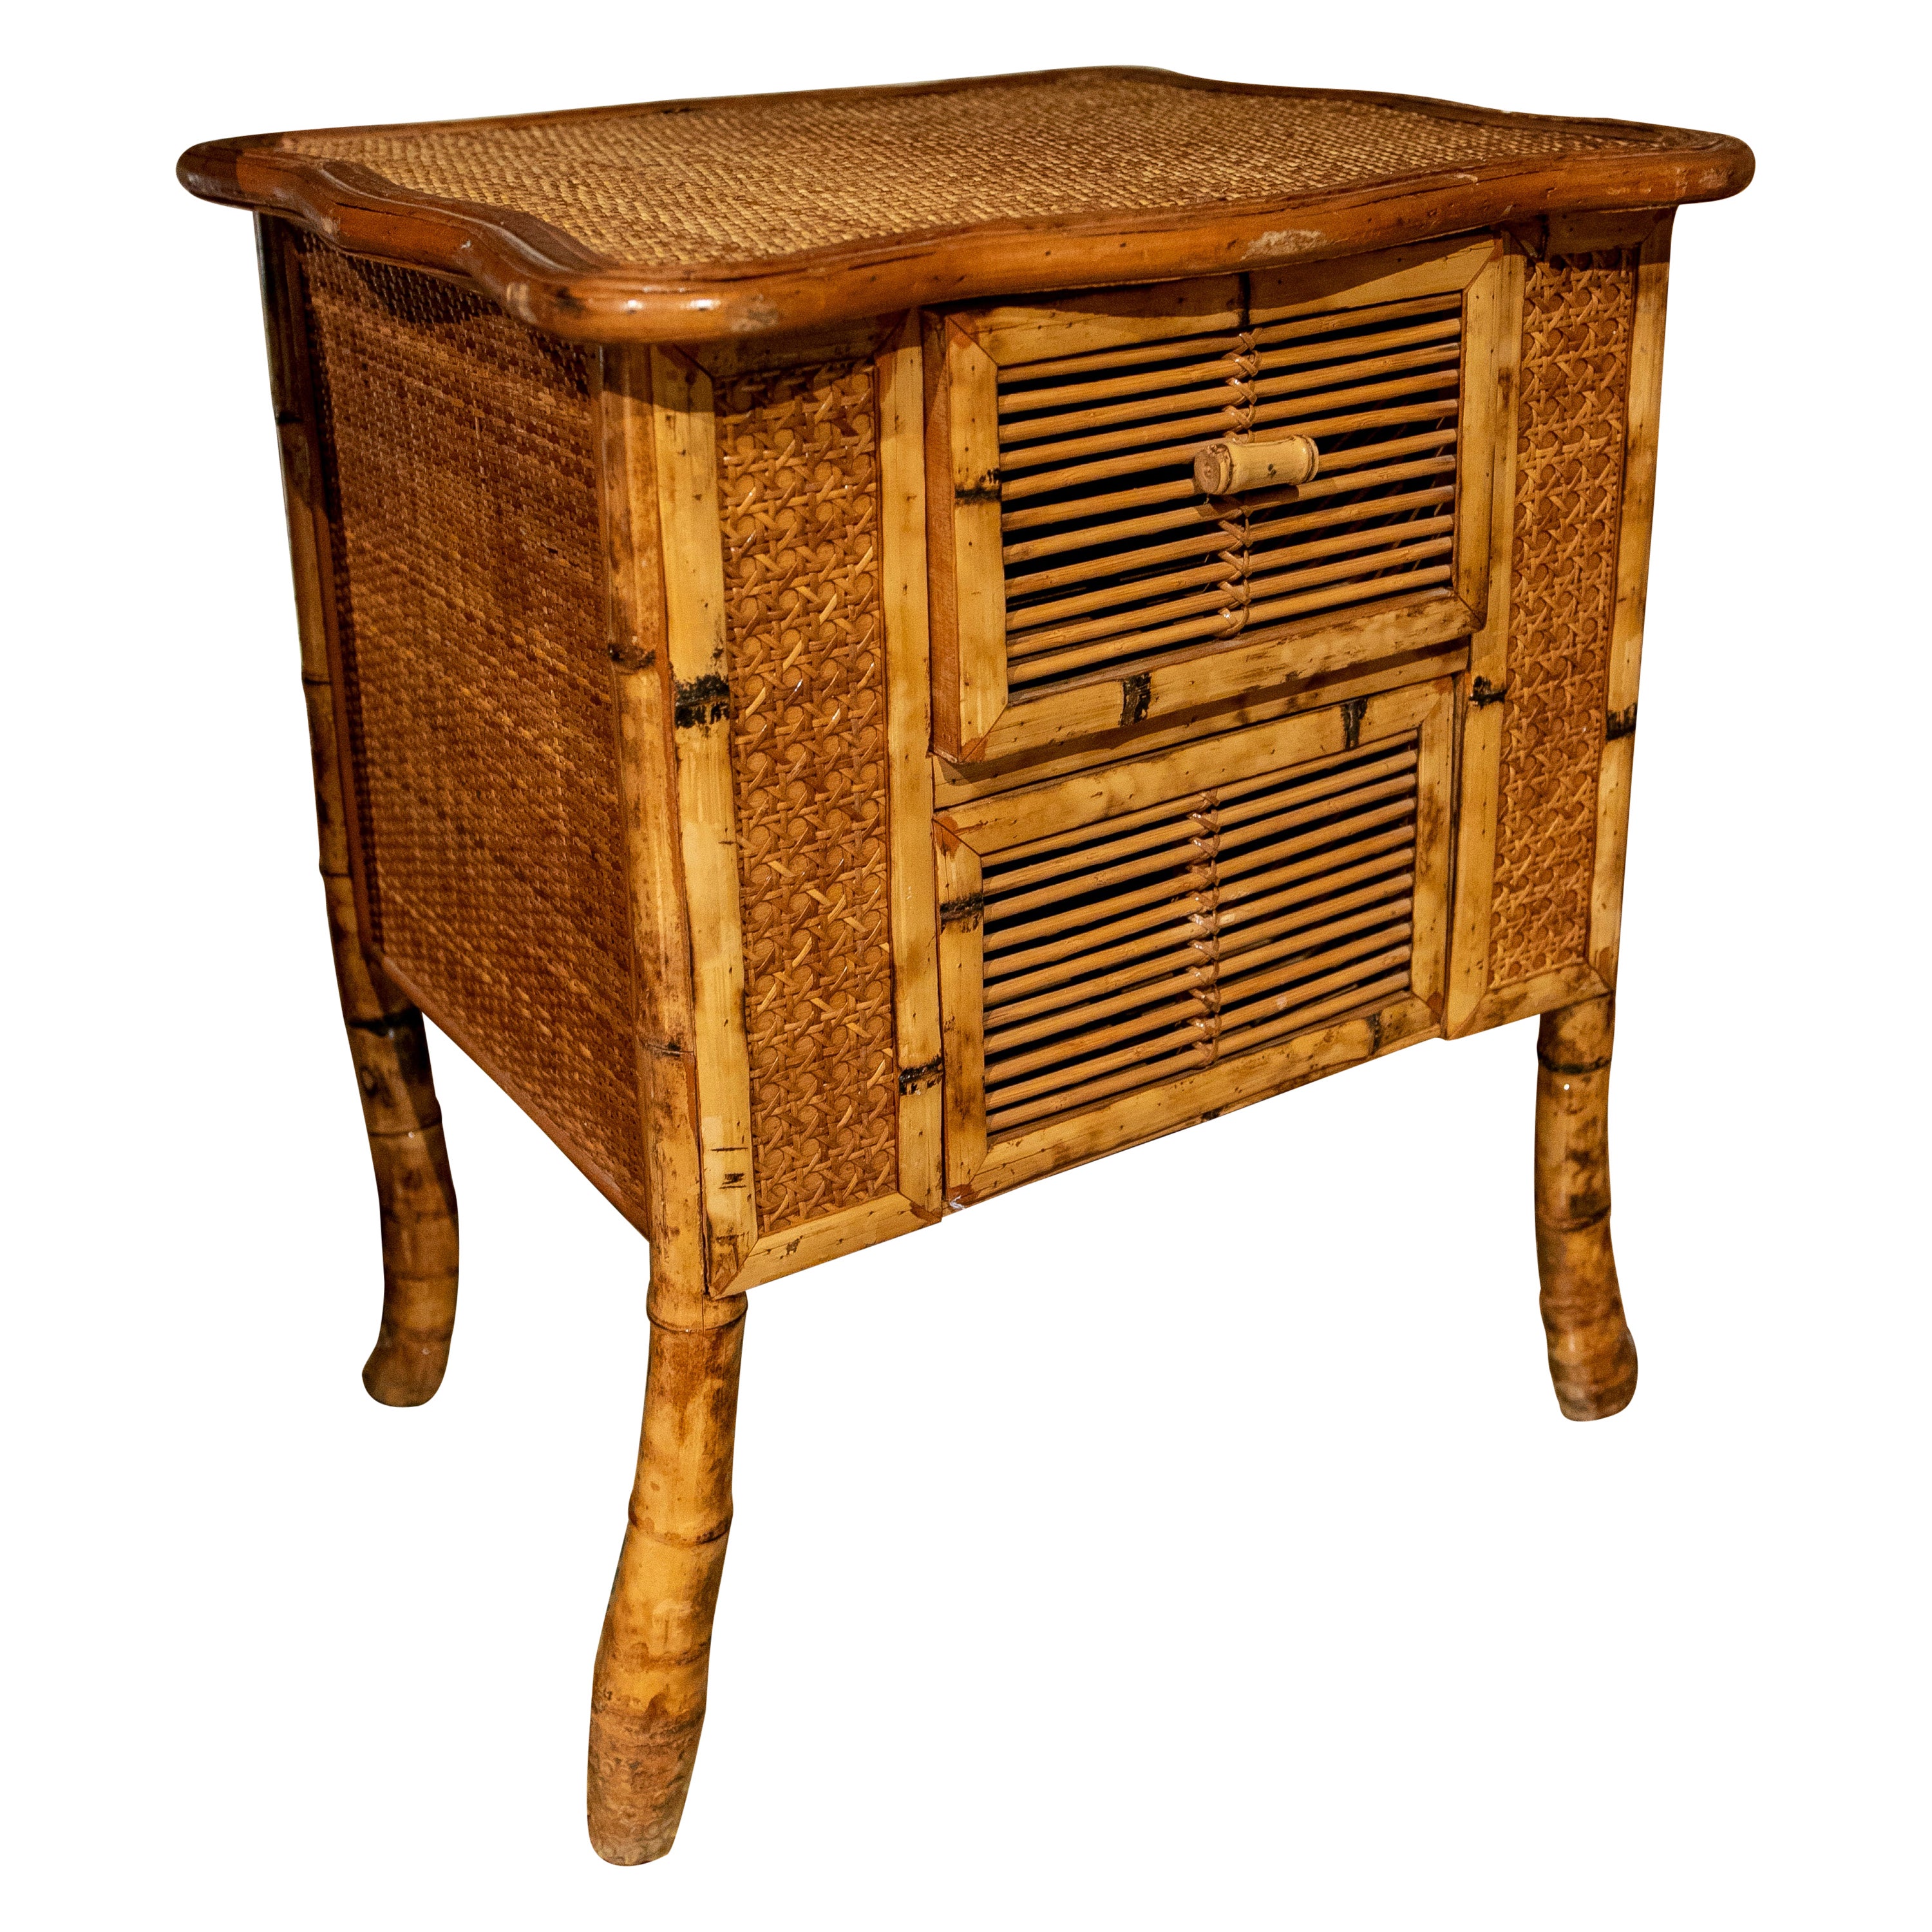 1970s Bamboo and Wicker Side Table with Drawer